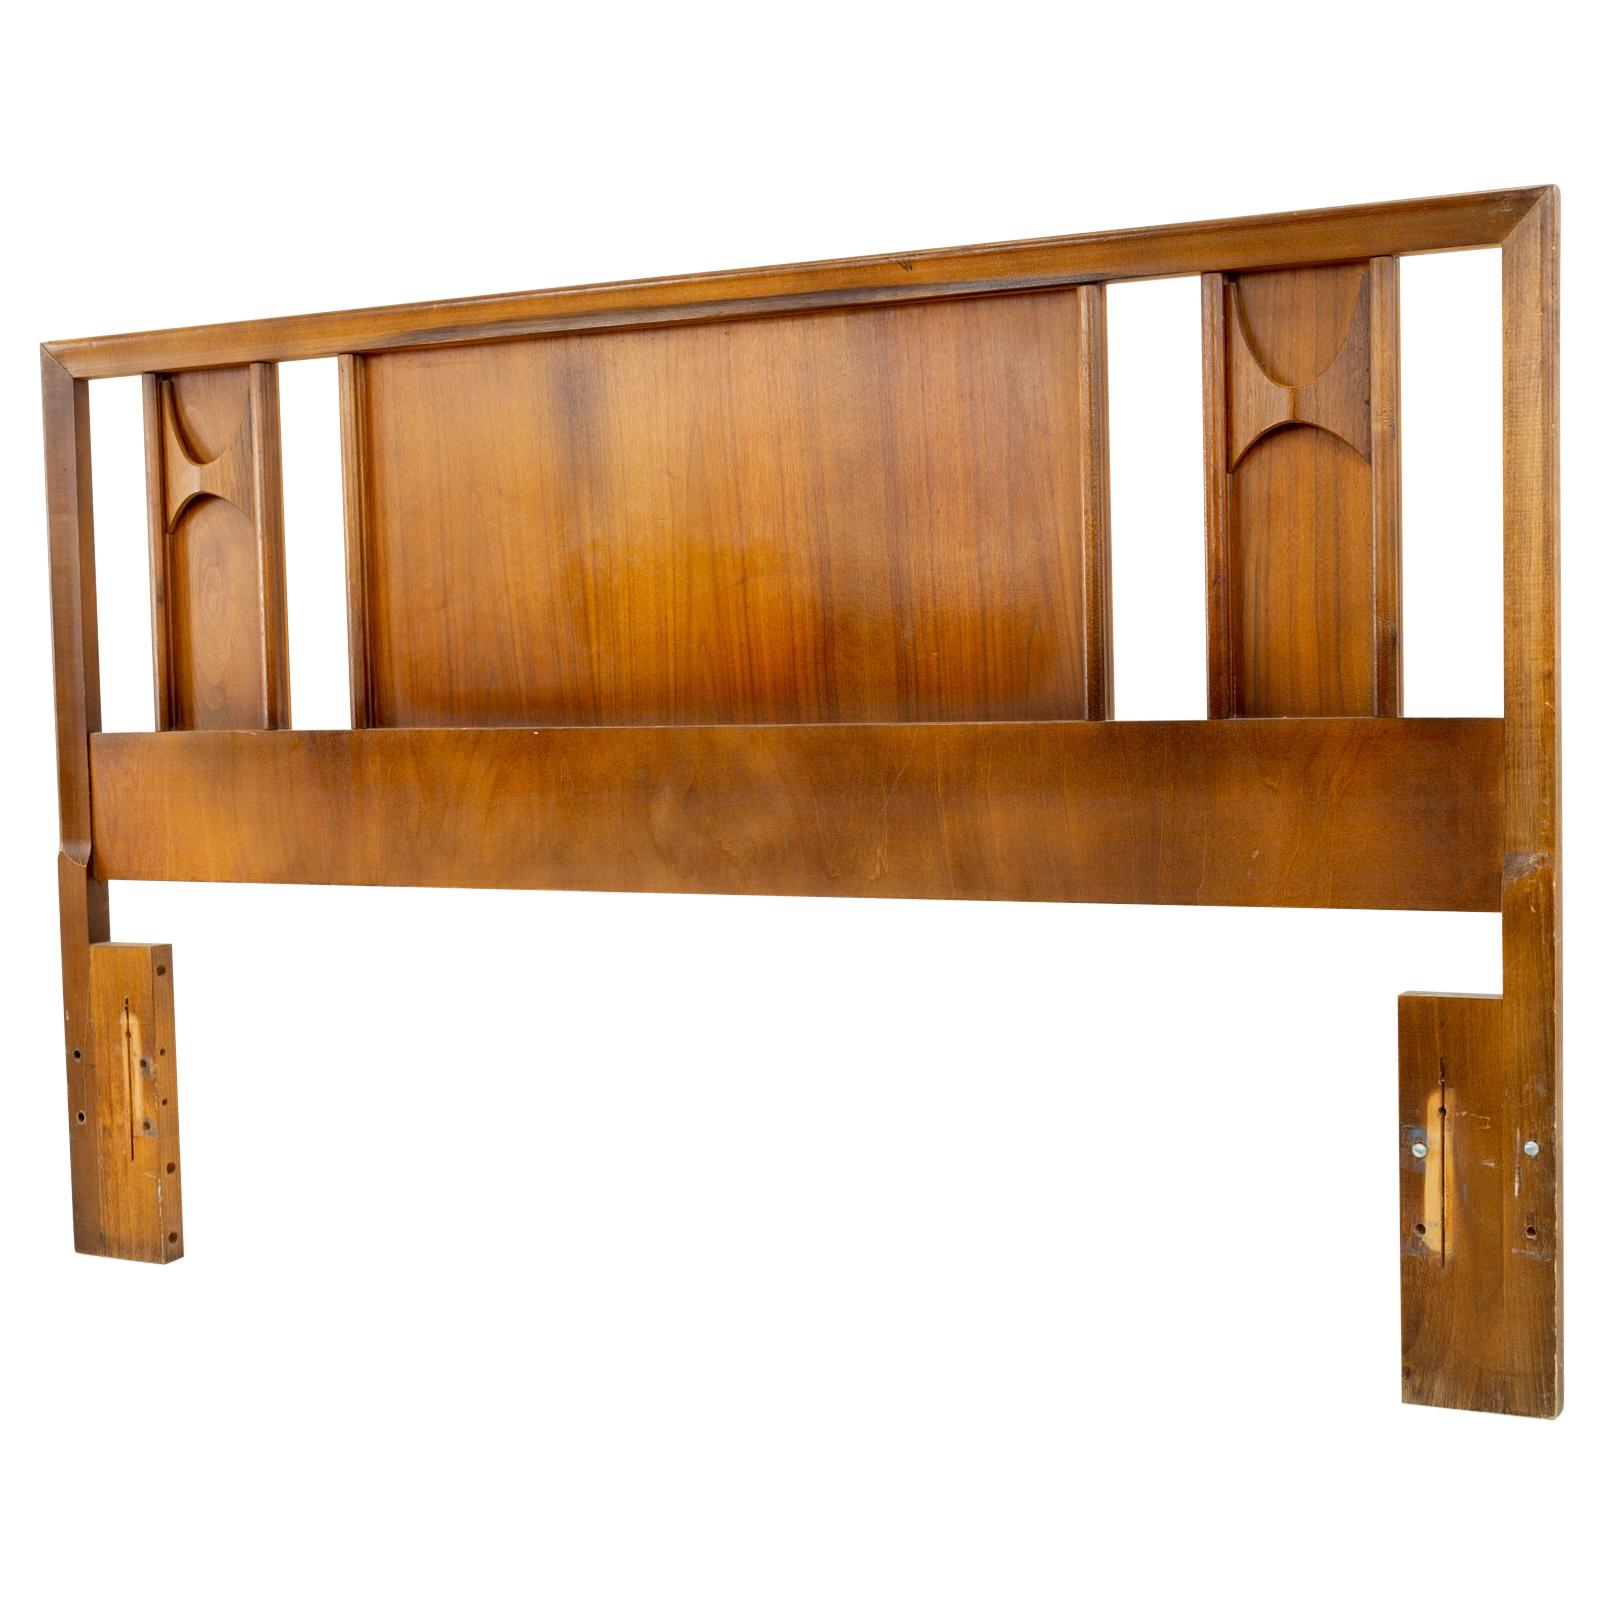 Kent Coffey perspecta mid century rosewood and walnut queen headboard
This headboard is 60.5 wide x 2 deep x 37.5 inches high

All pieces of furniture can be had in what we call restored vintage condition. That means the piece is restored upon